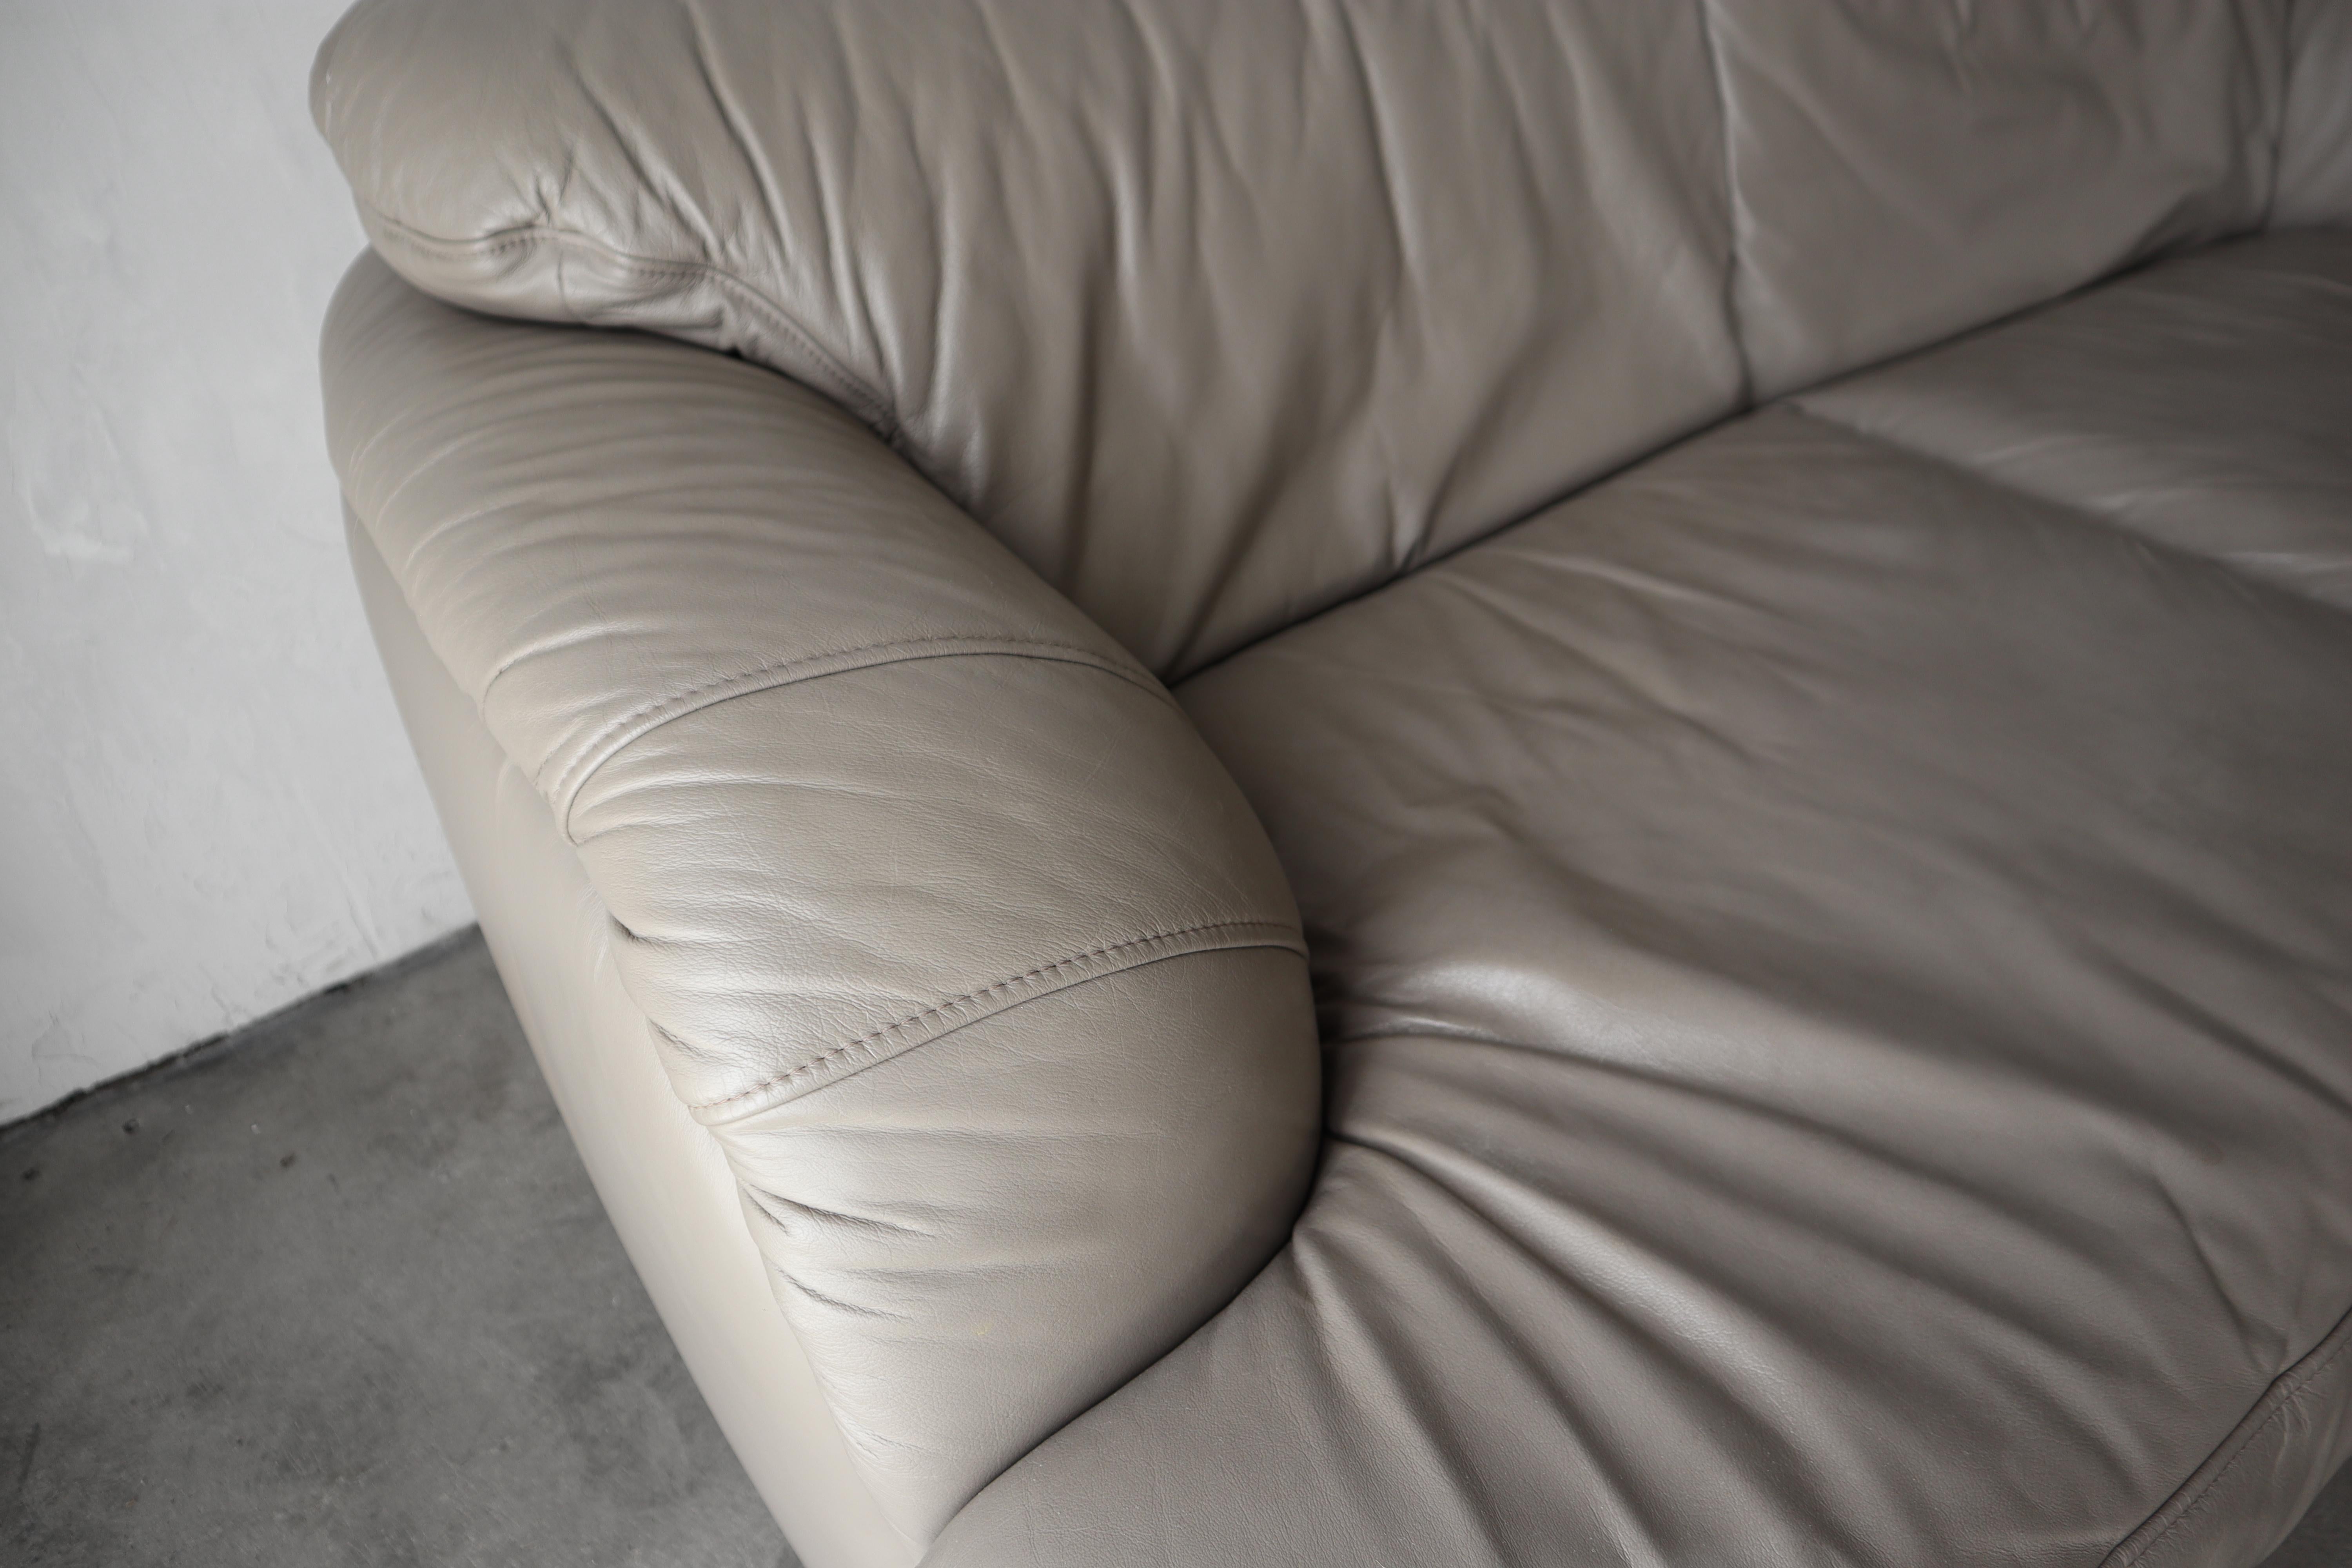 Post Modern German Leather Loveseat Sofas - A Pair For Sale 3